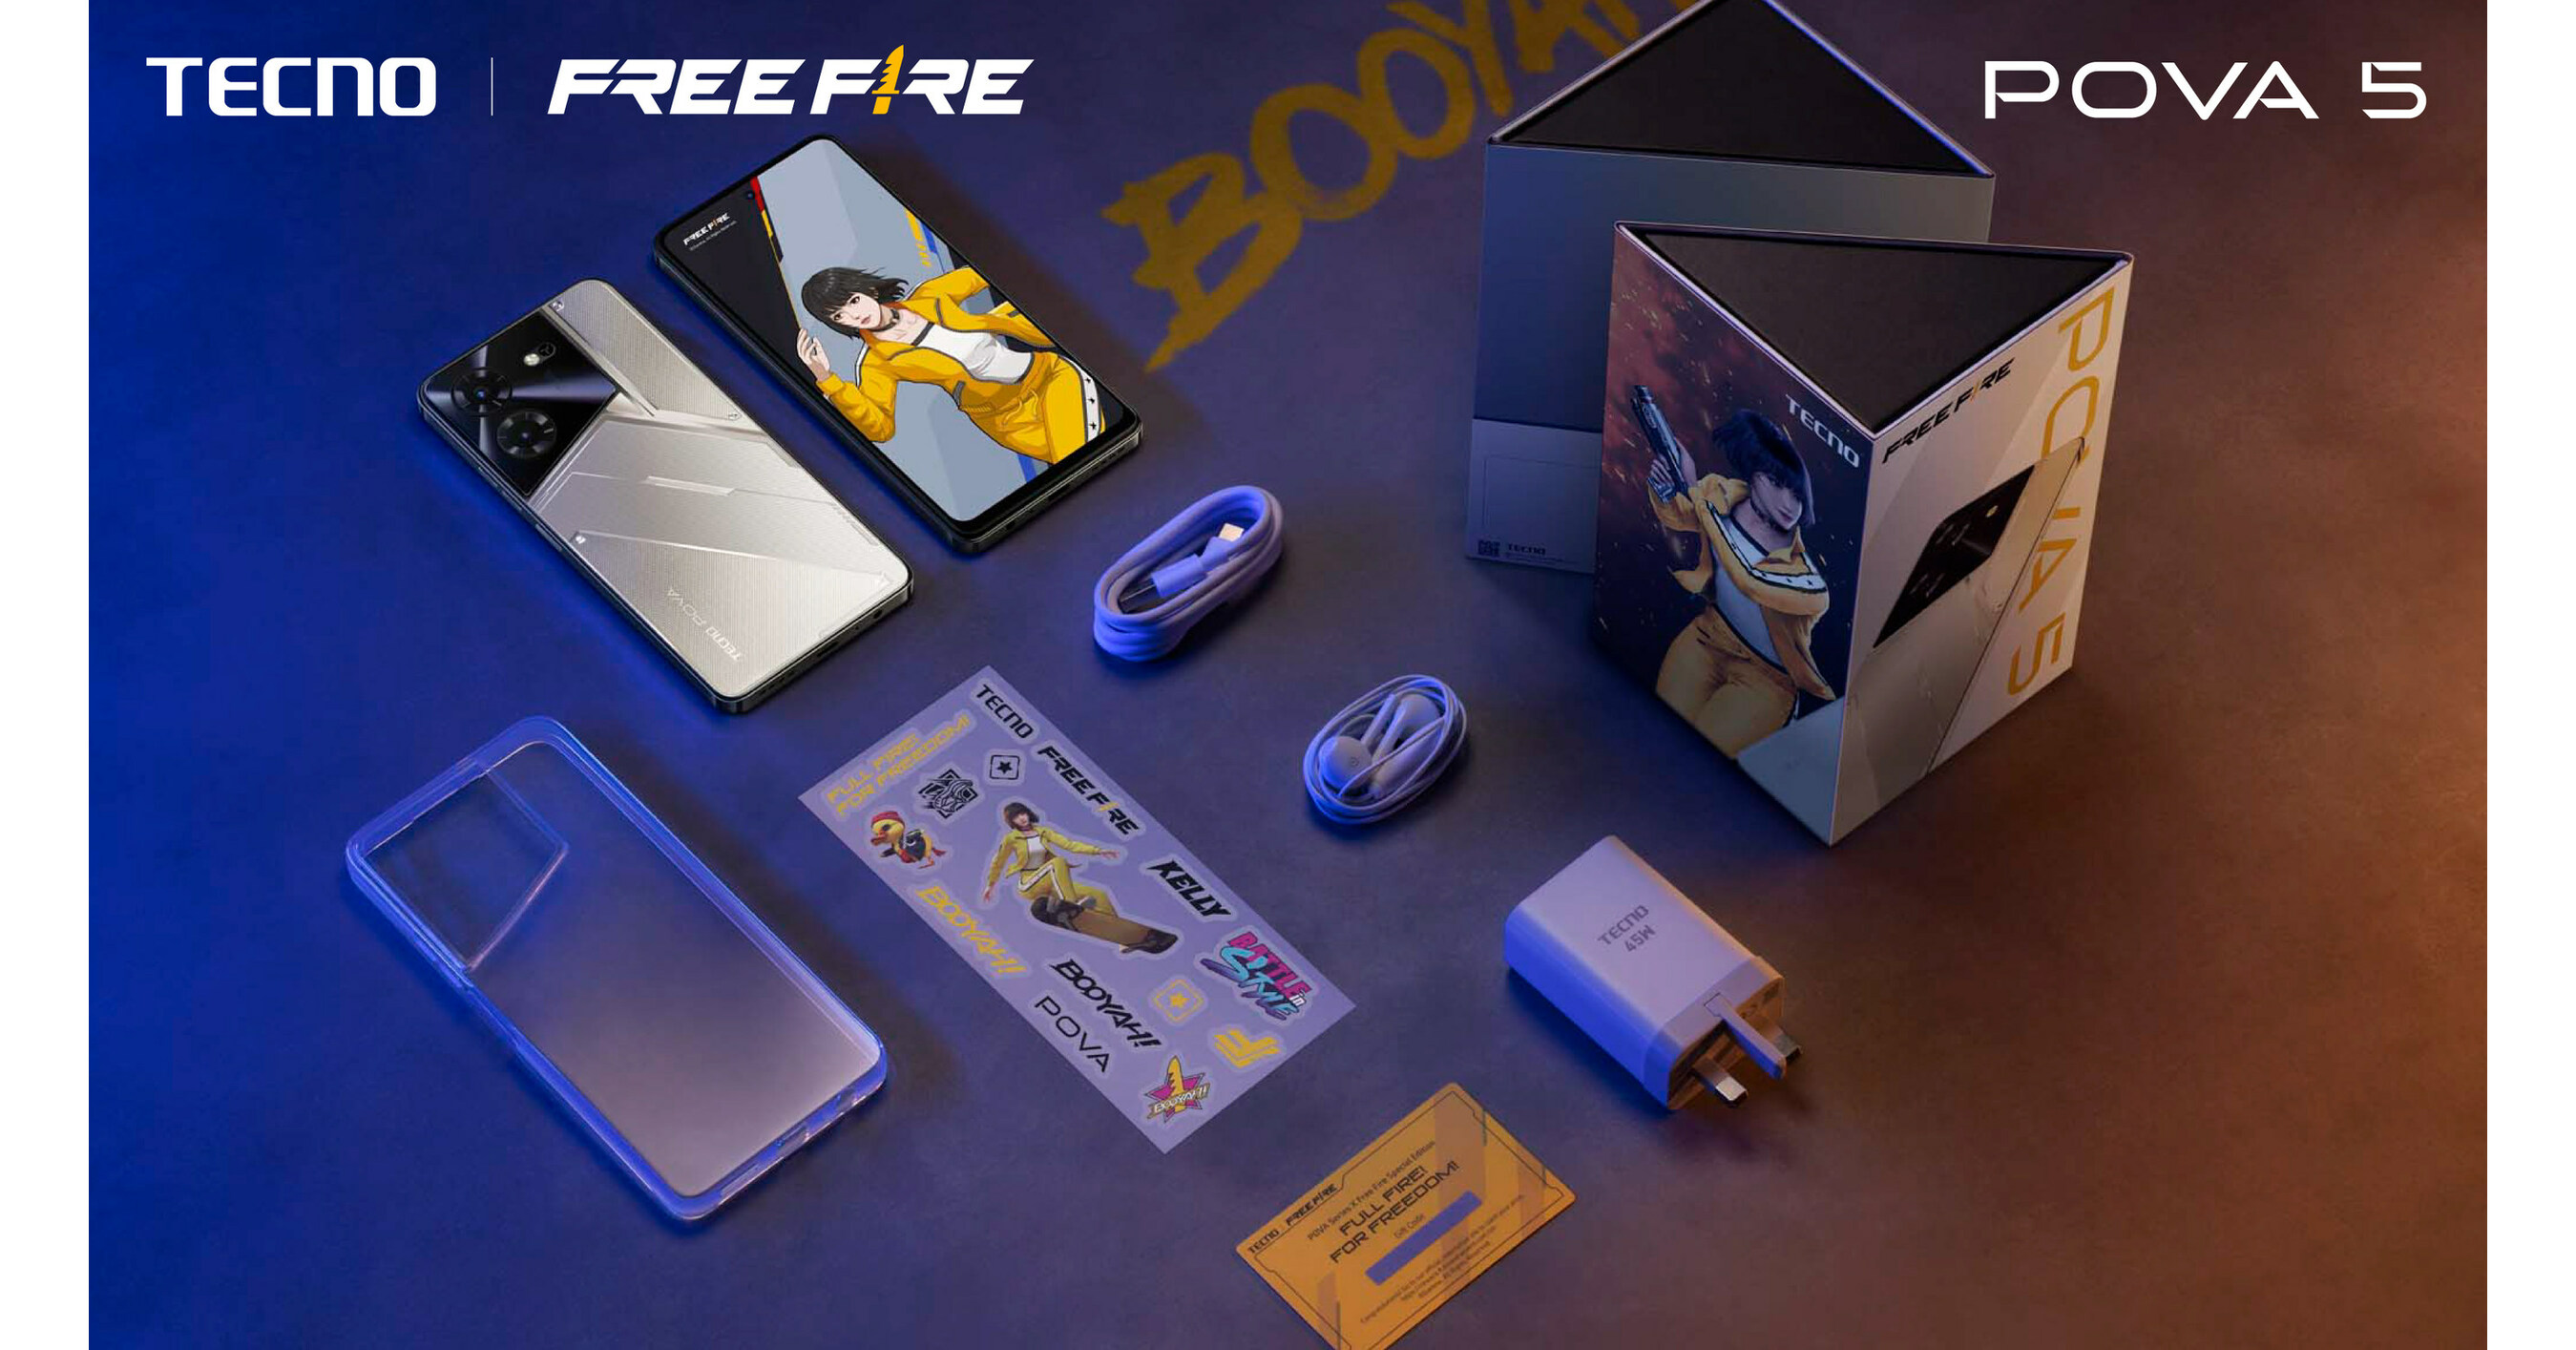 5 best smartphones to play Free Fire